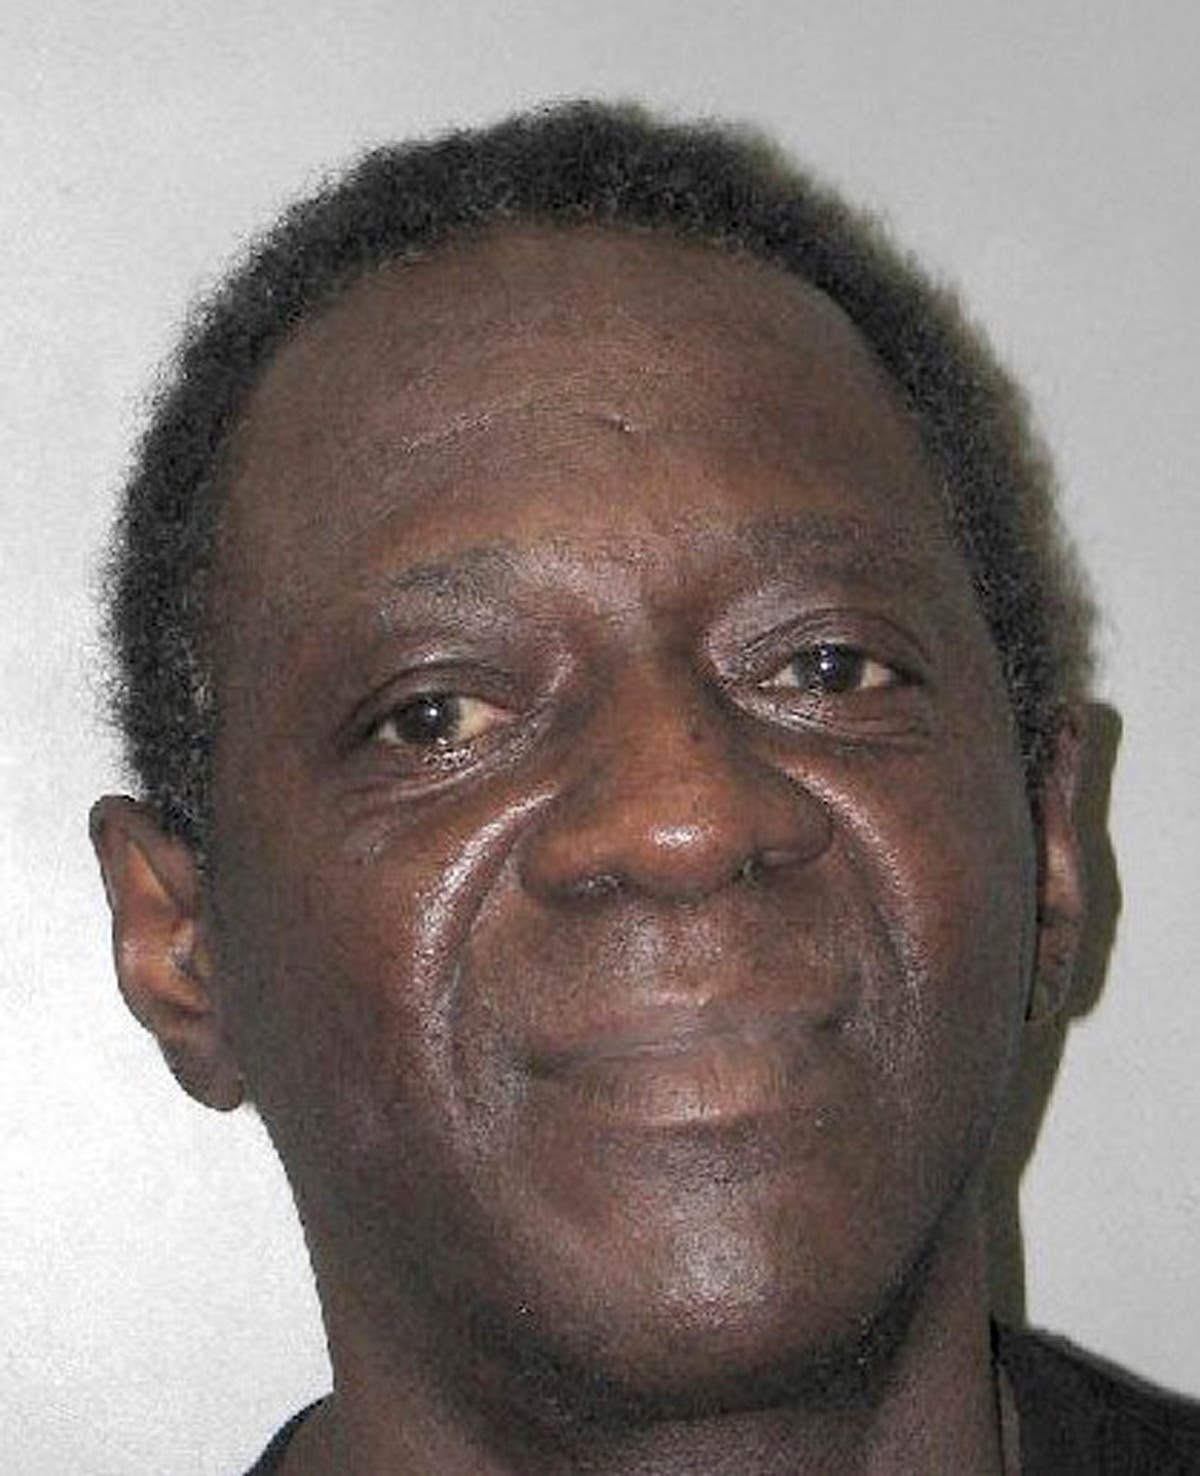 
Vegas lawyers: 2 sides to Flavor Flav domestic battery case